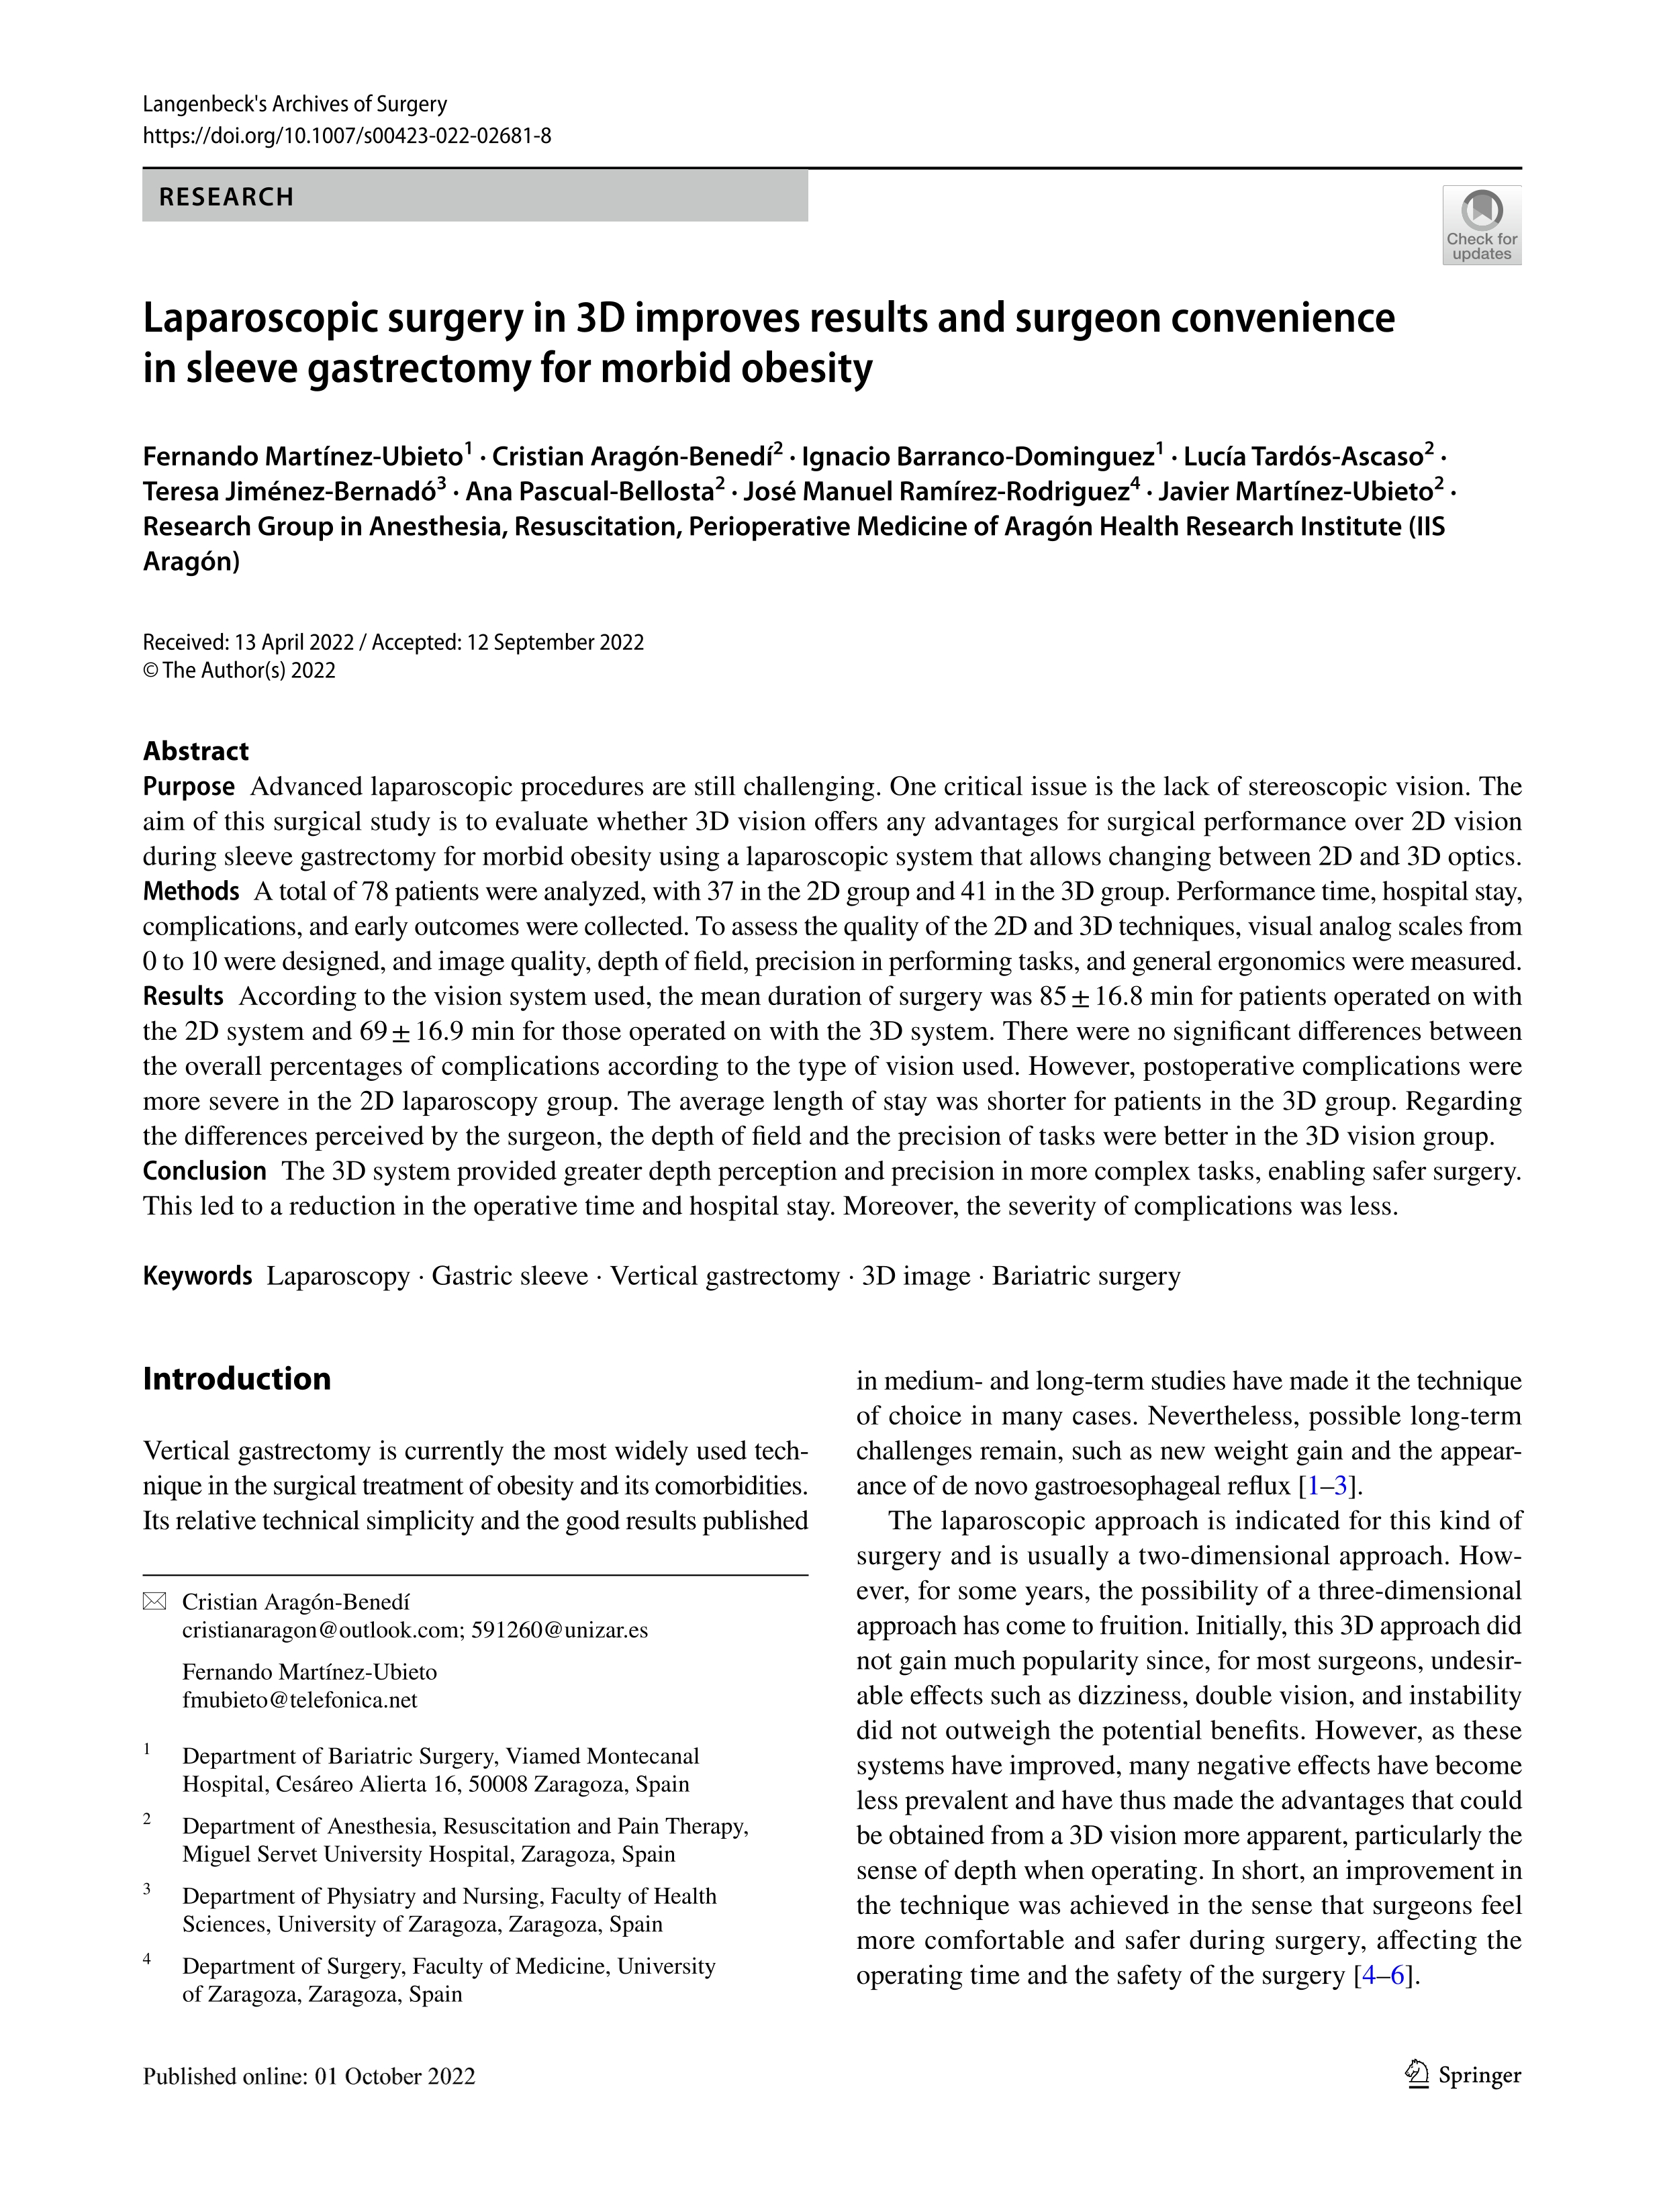 Laparoscopic surgery in 3D improves results and surgeon convenience in sleeve gastrectomy for morbid obesity